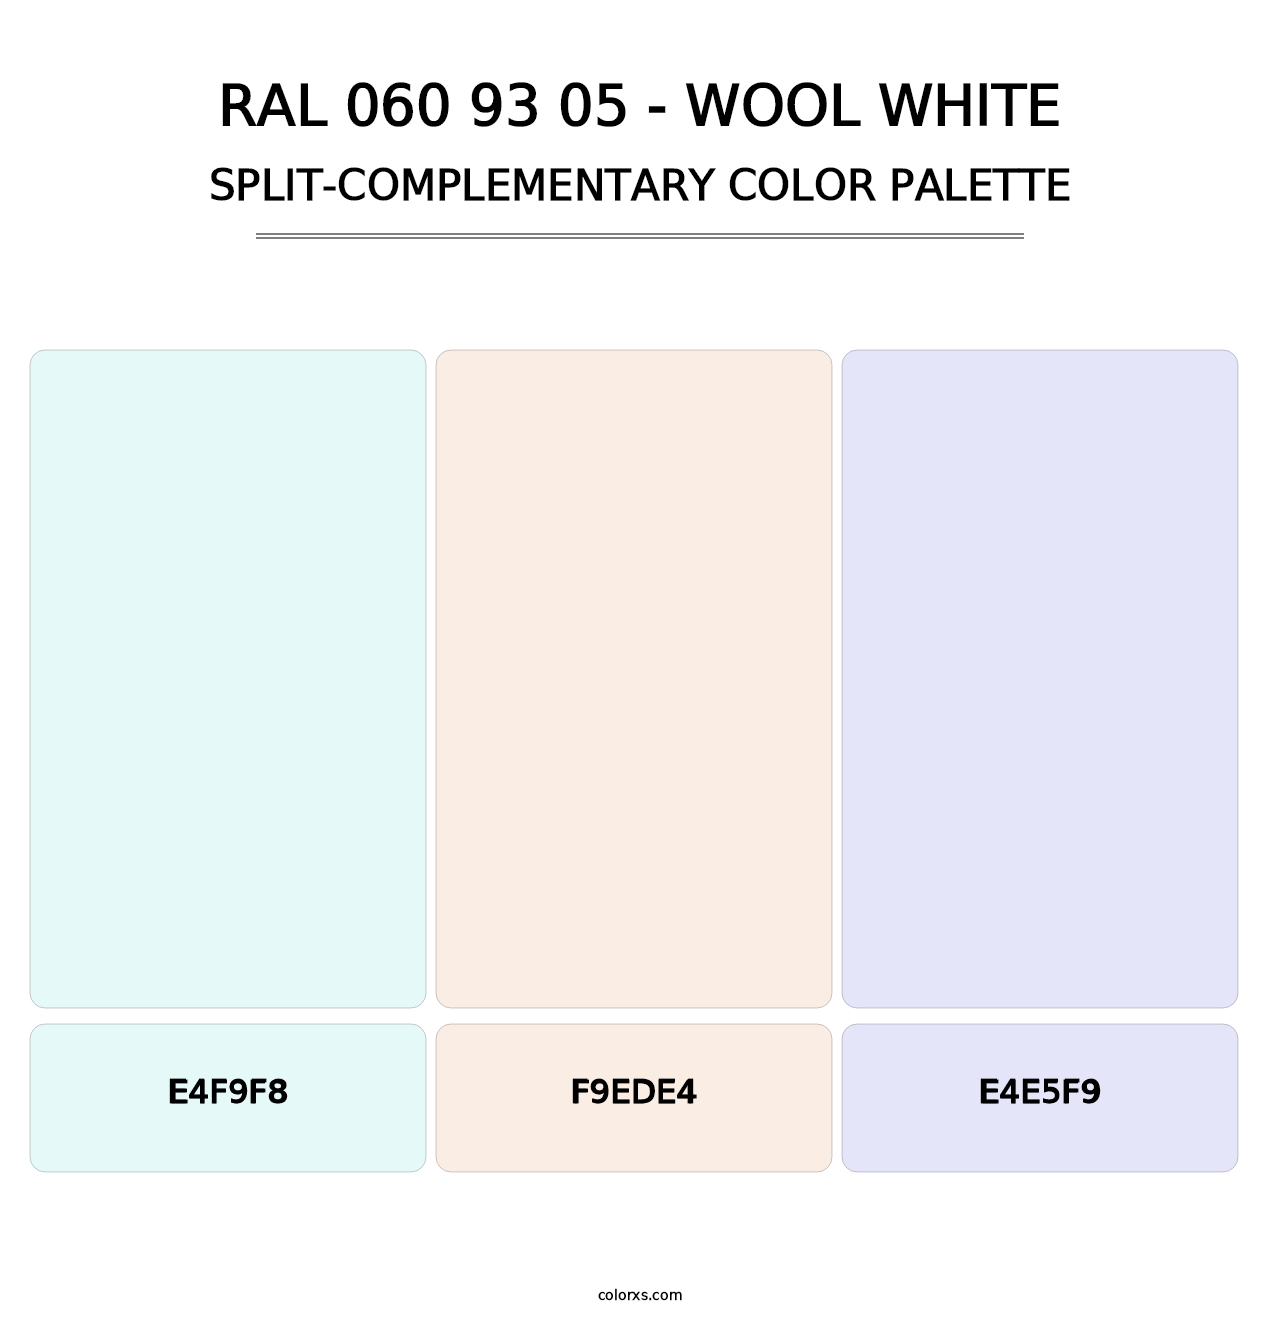 RAL 060 93 05 - Wool White - Split-Complementary Color Palette